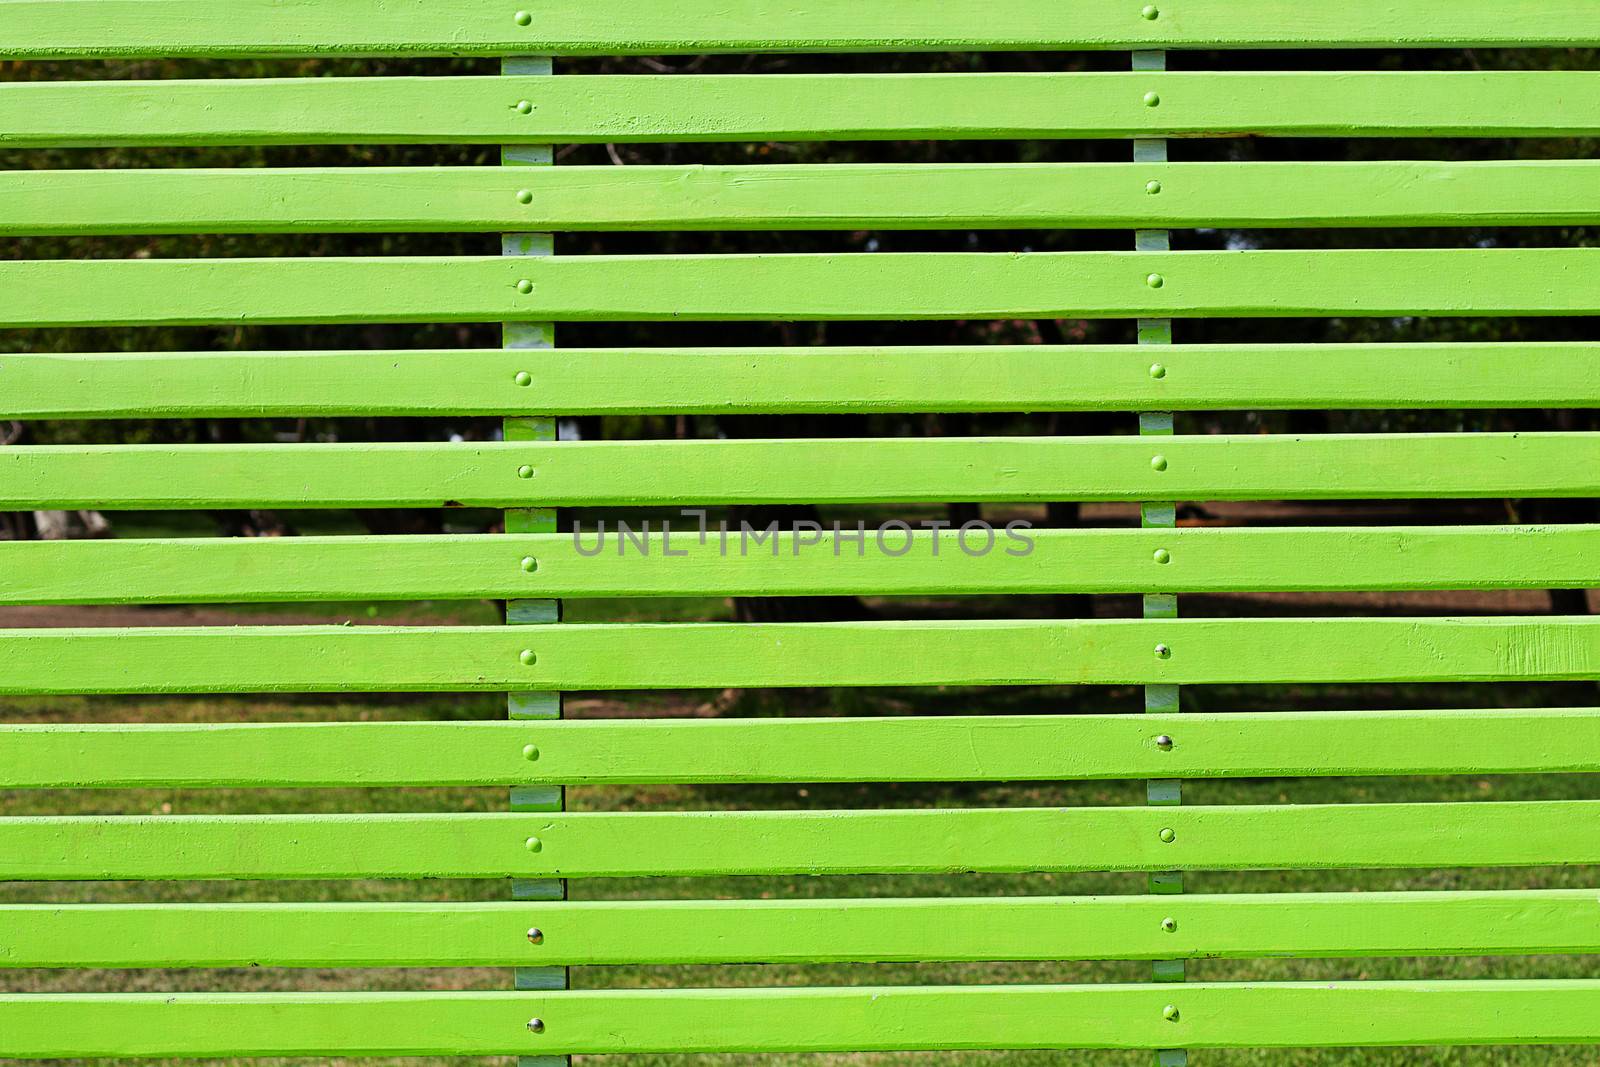 gigantic green bench in the park